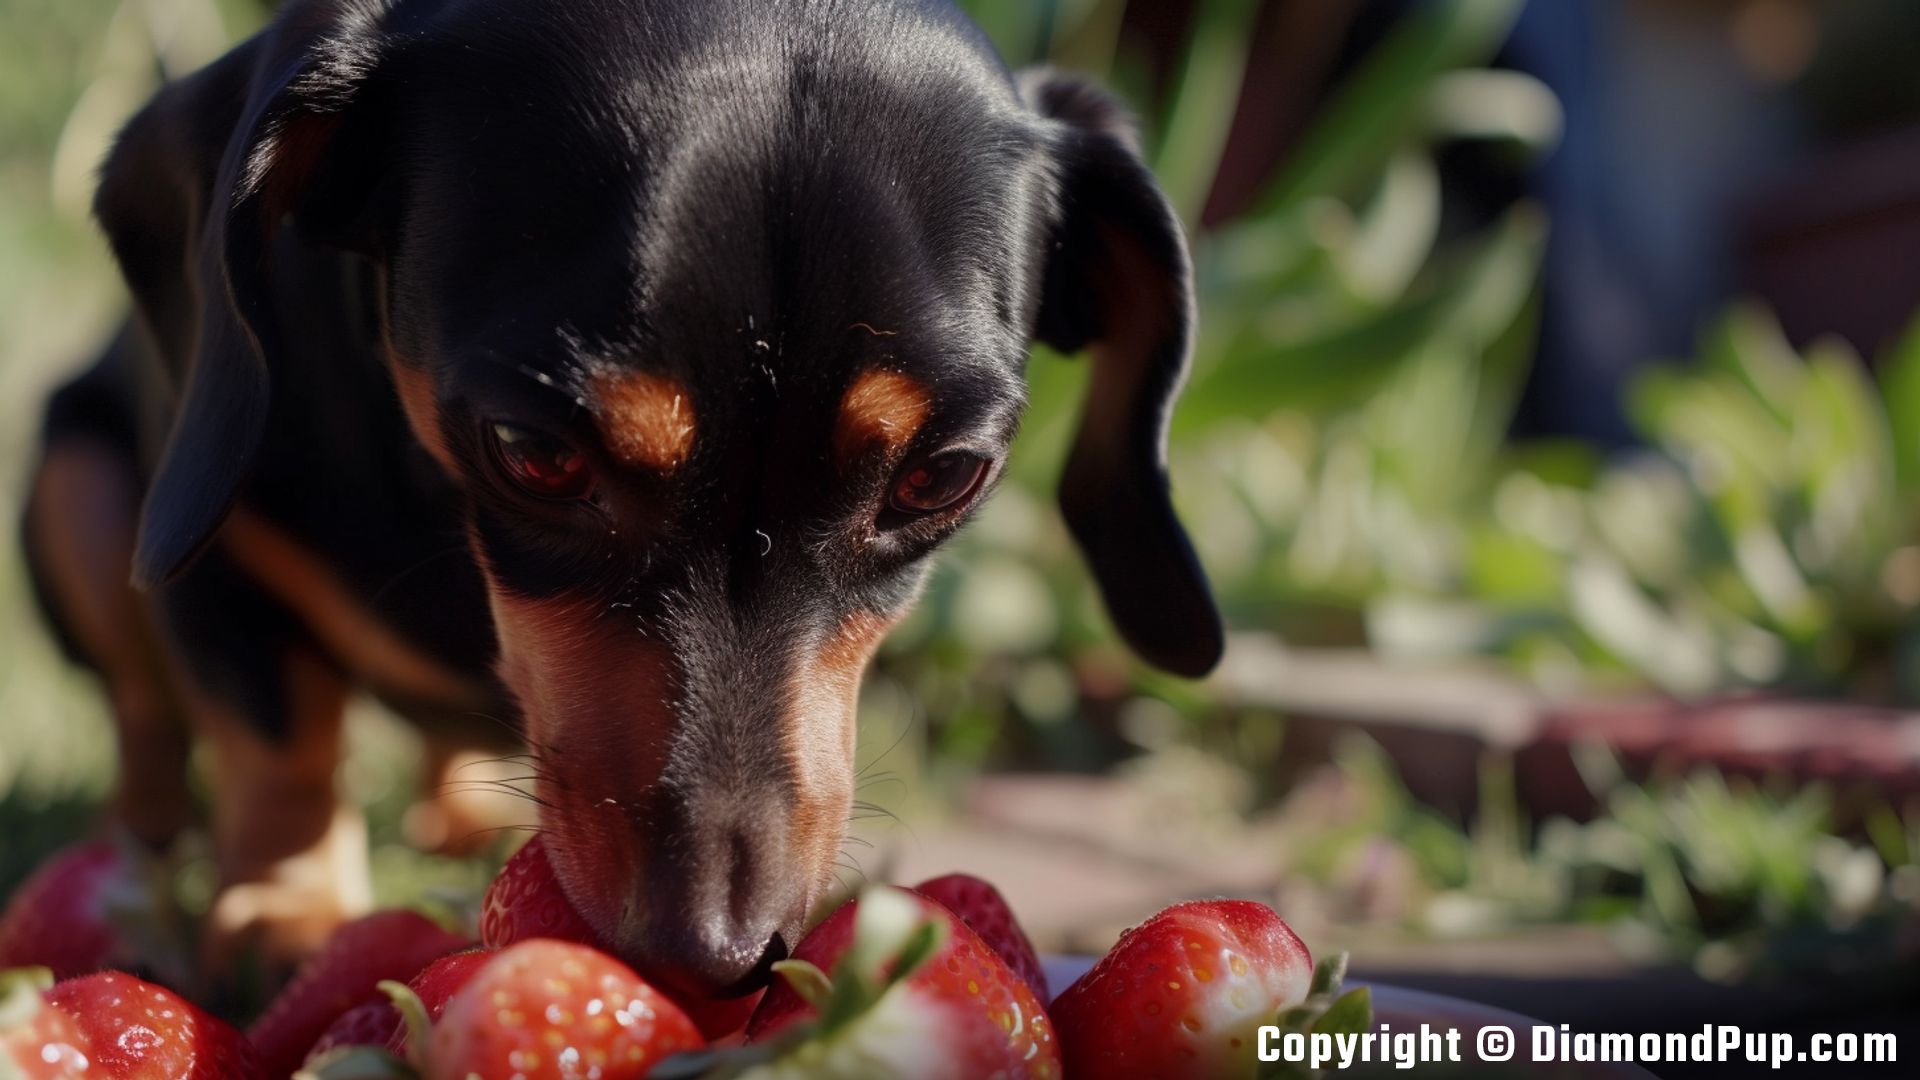 Photograph of a Playful Dachshund Eating Strawberries